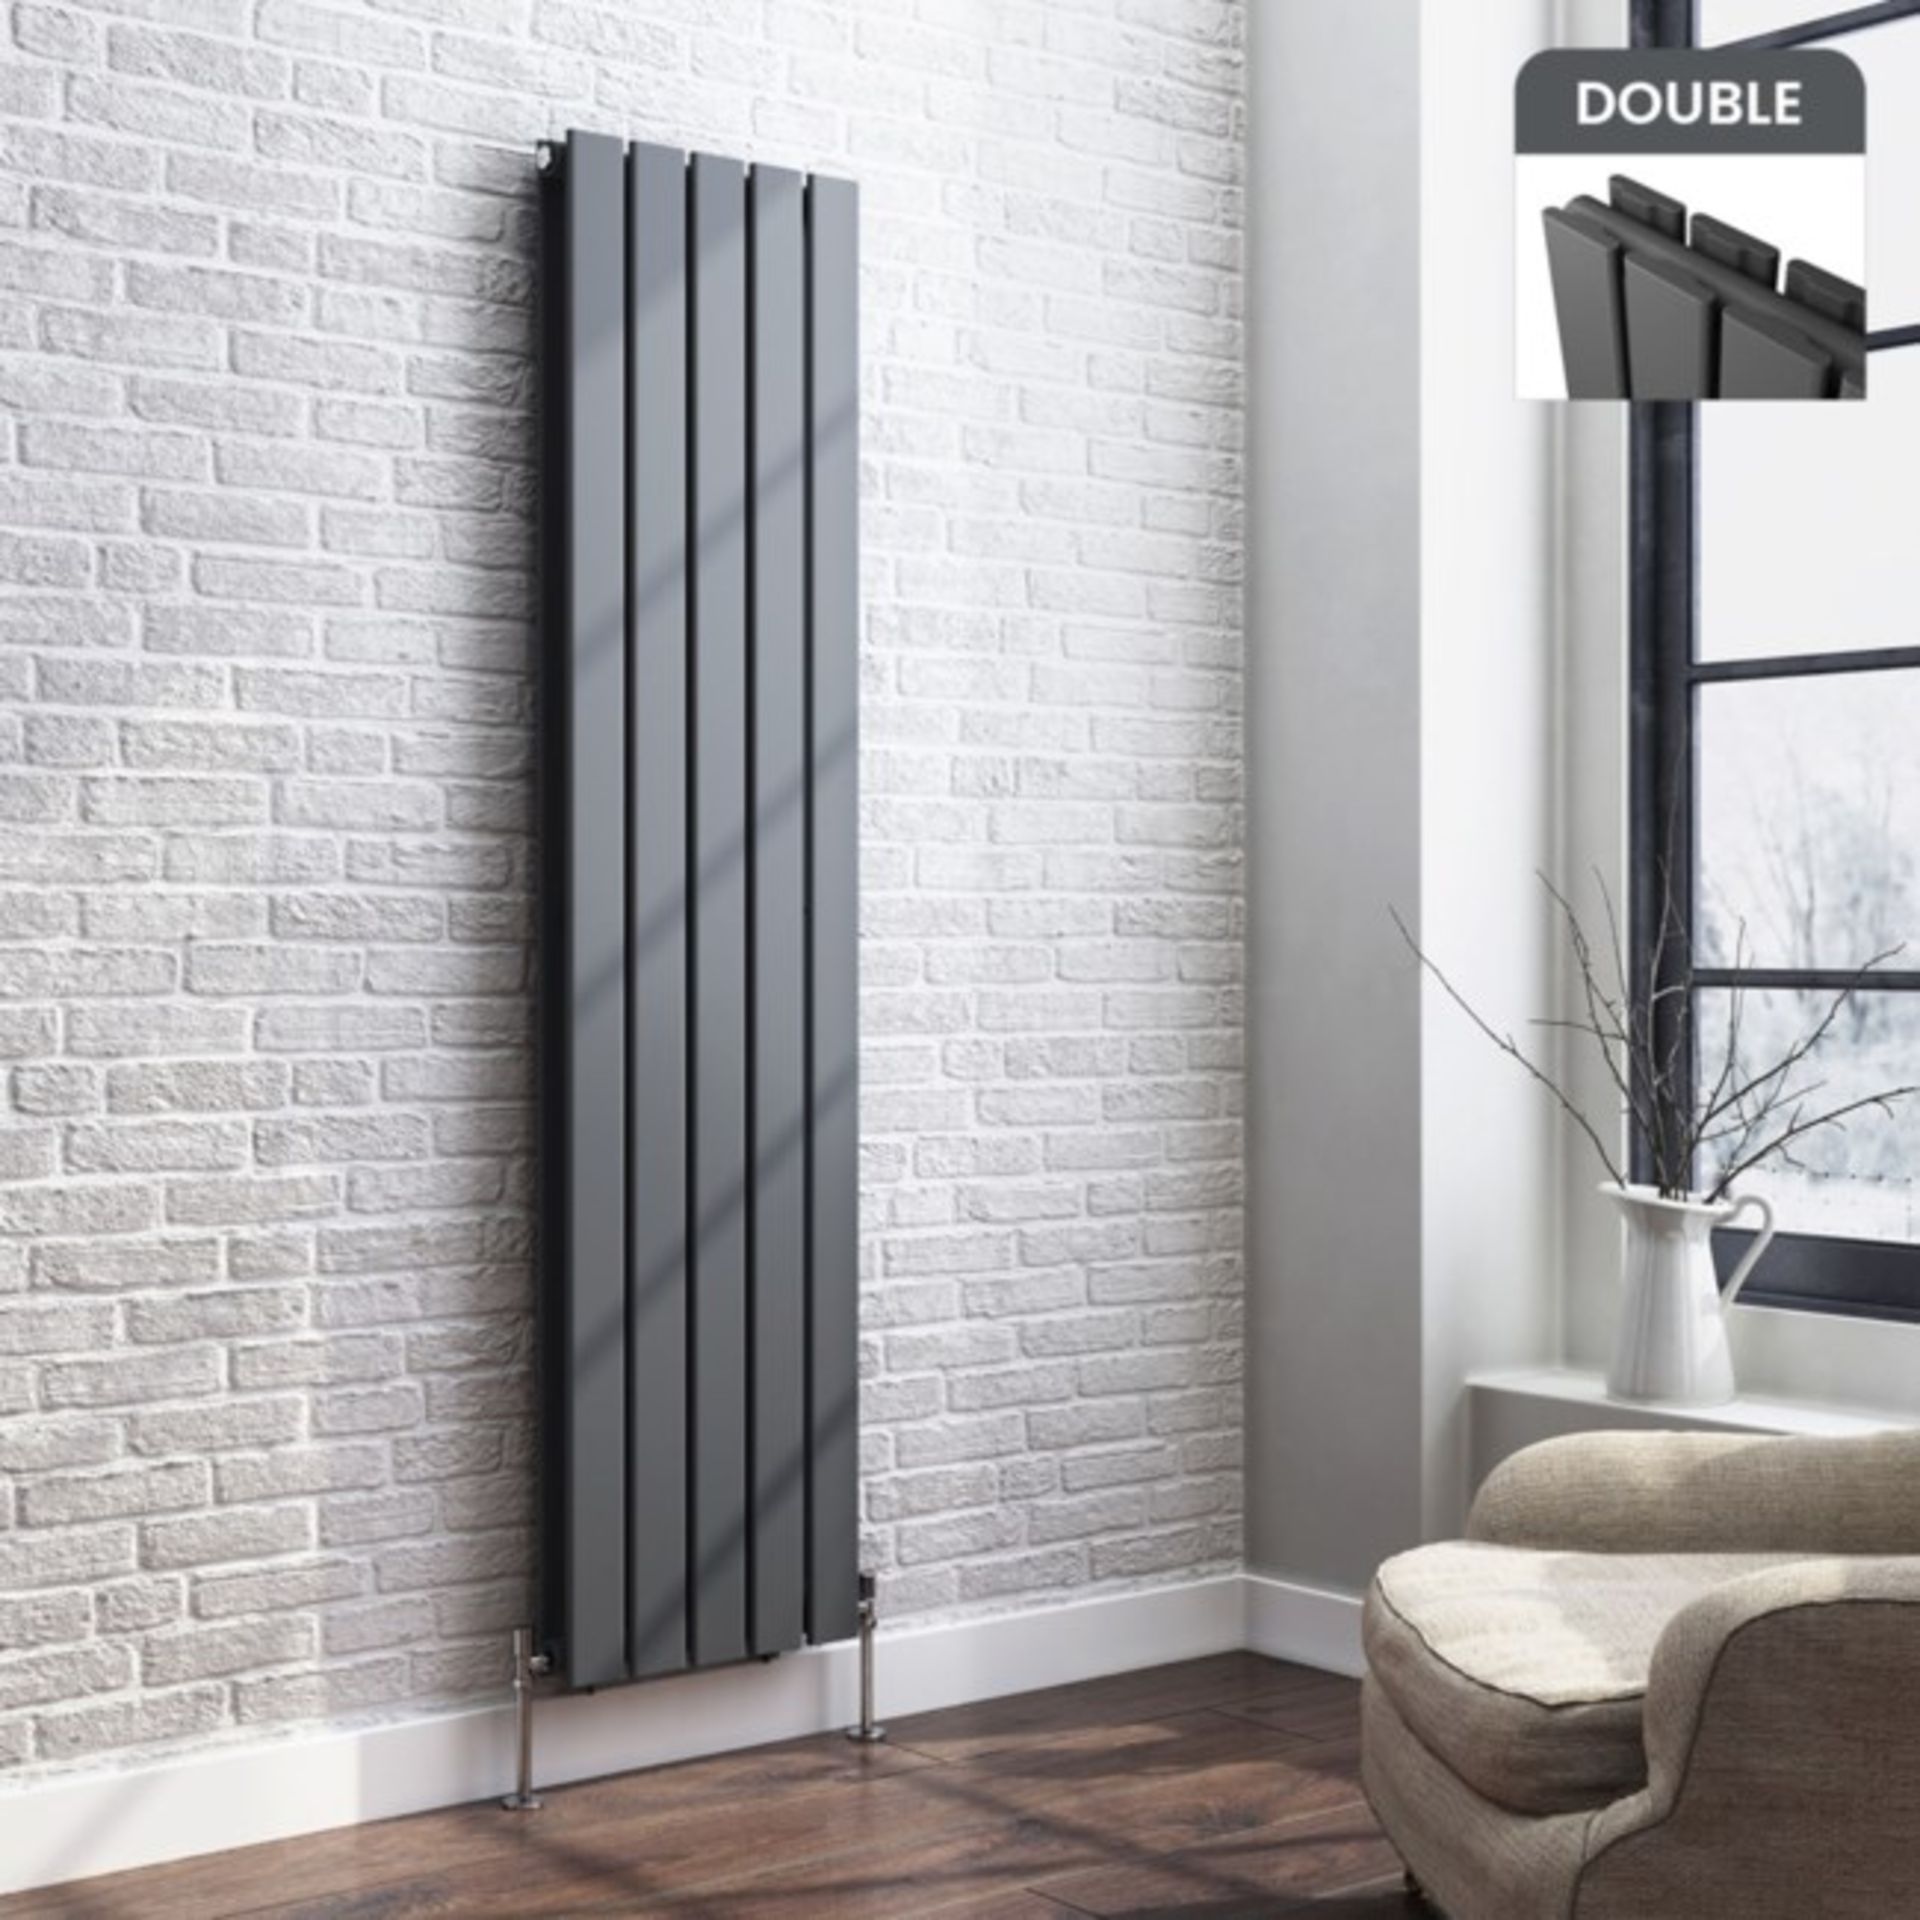 1800x480mm Anthracite Double Flat Panel Vertical Radiator.RRP £499.99.Made with low carbon ste... - Image 4 of 4